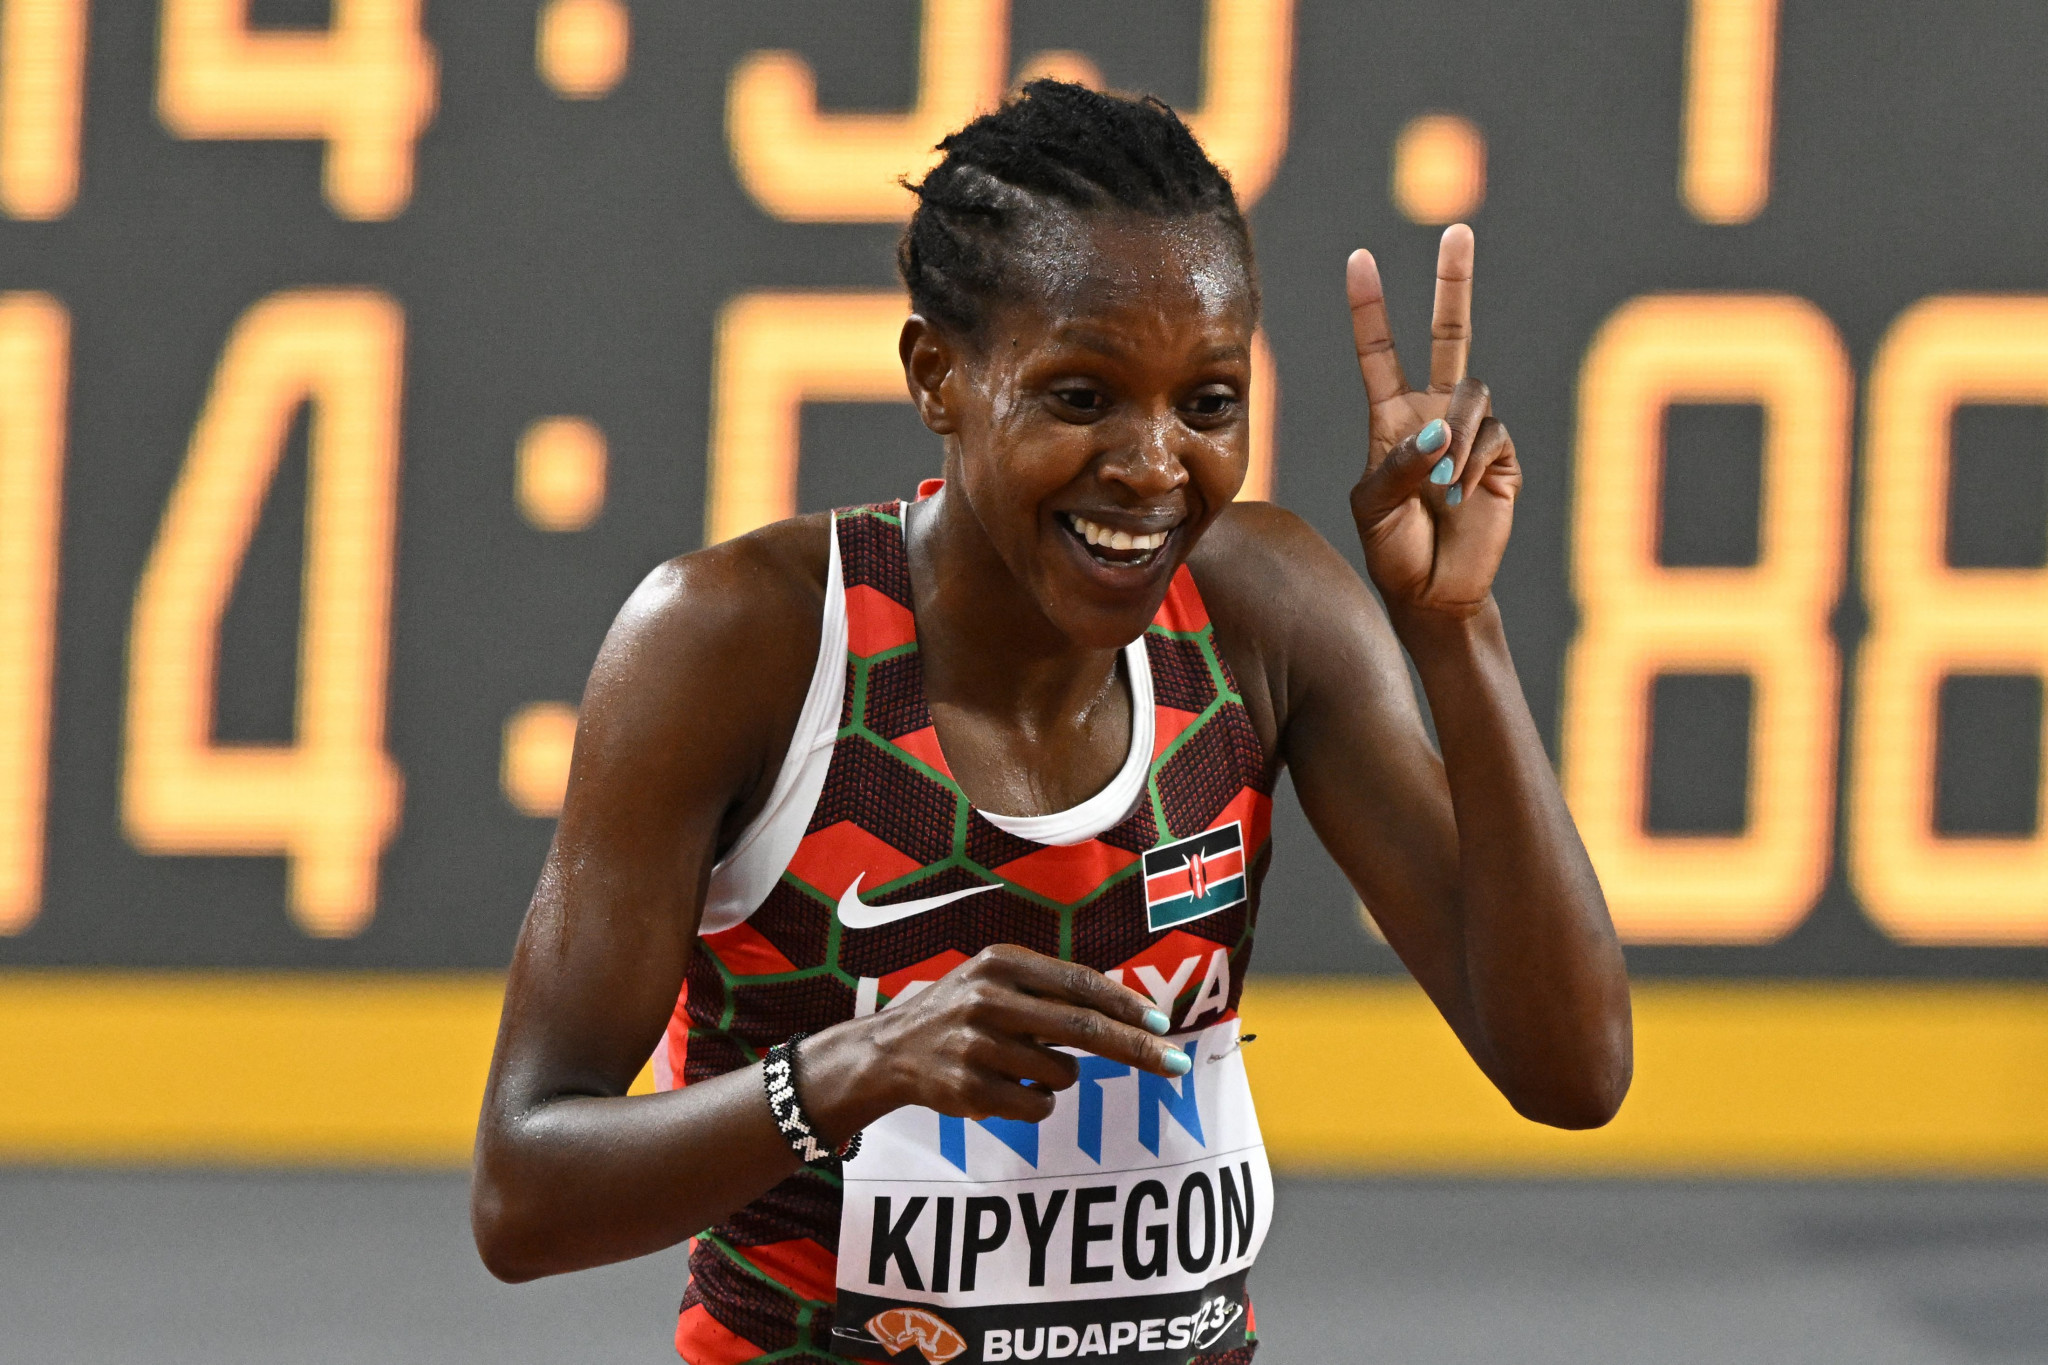 The 5,000m provided a second gold of the World Championships in Budapest for Faith Kipyegon of Kenya, following on from her third 1500m world title ©Getty Images